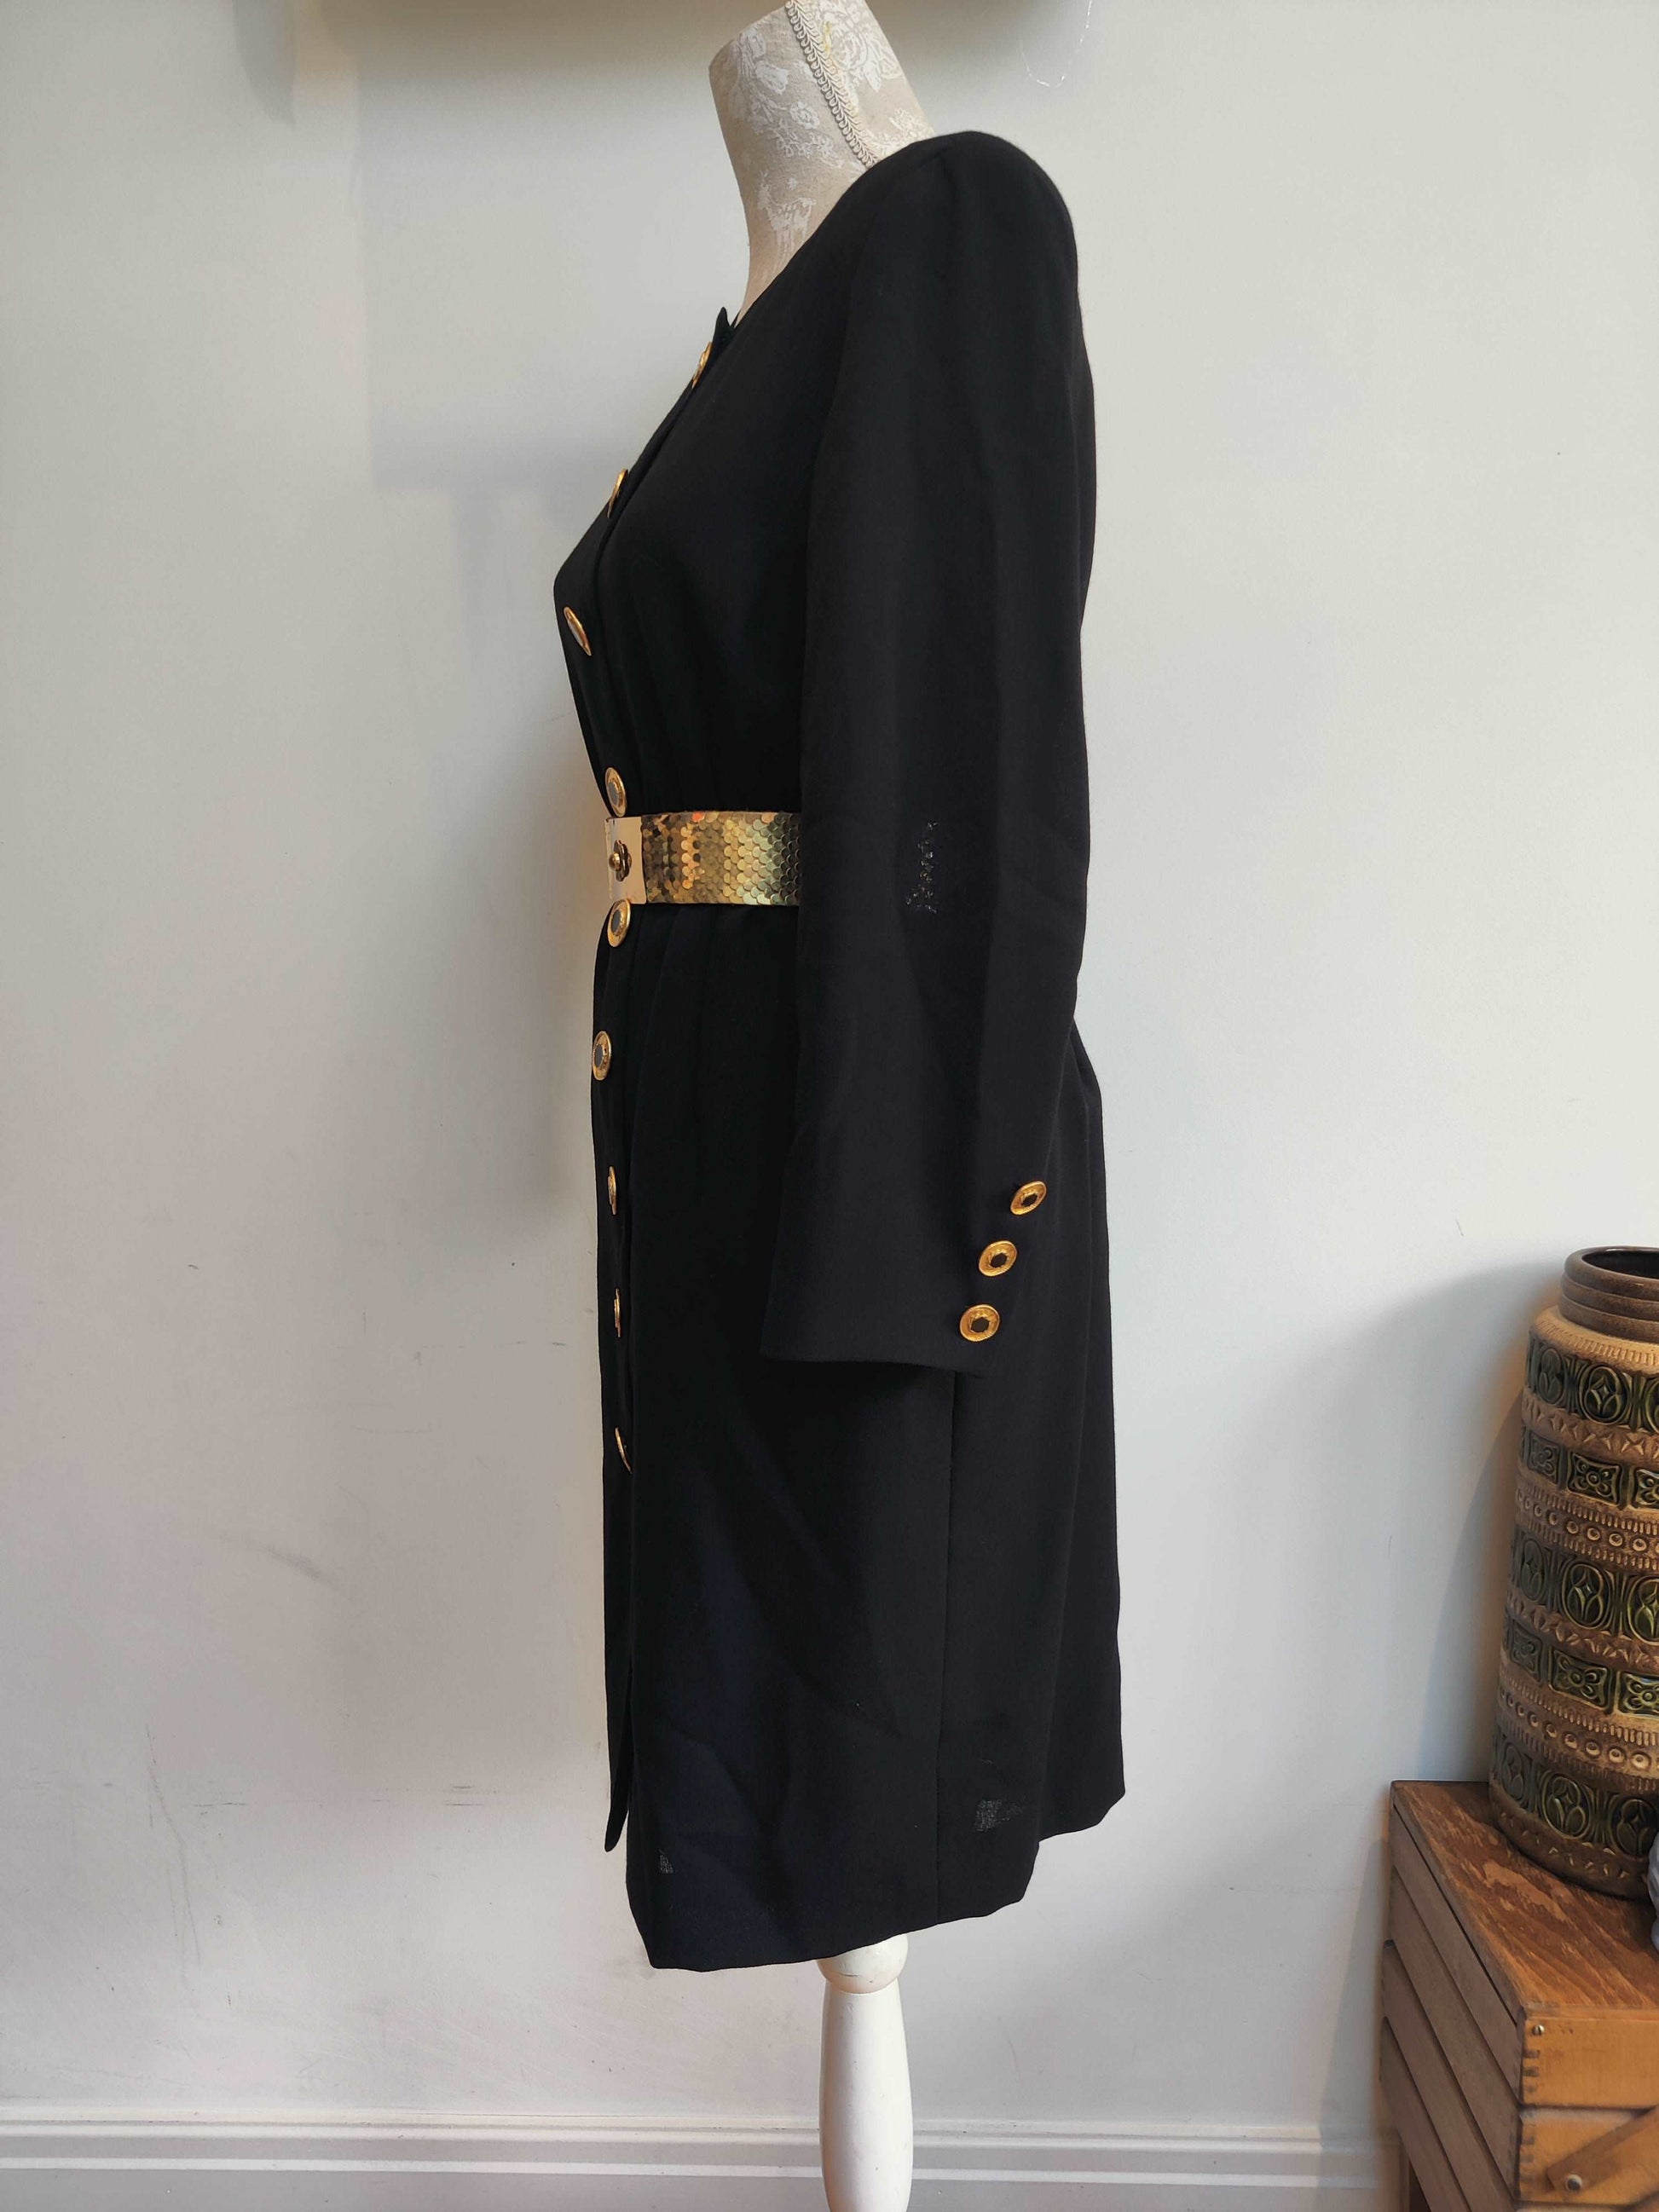 Black and gold 80s power dress by Jaeger.